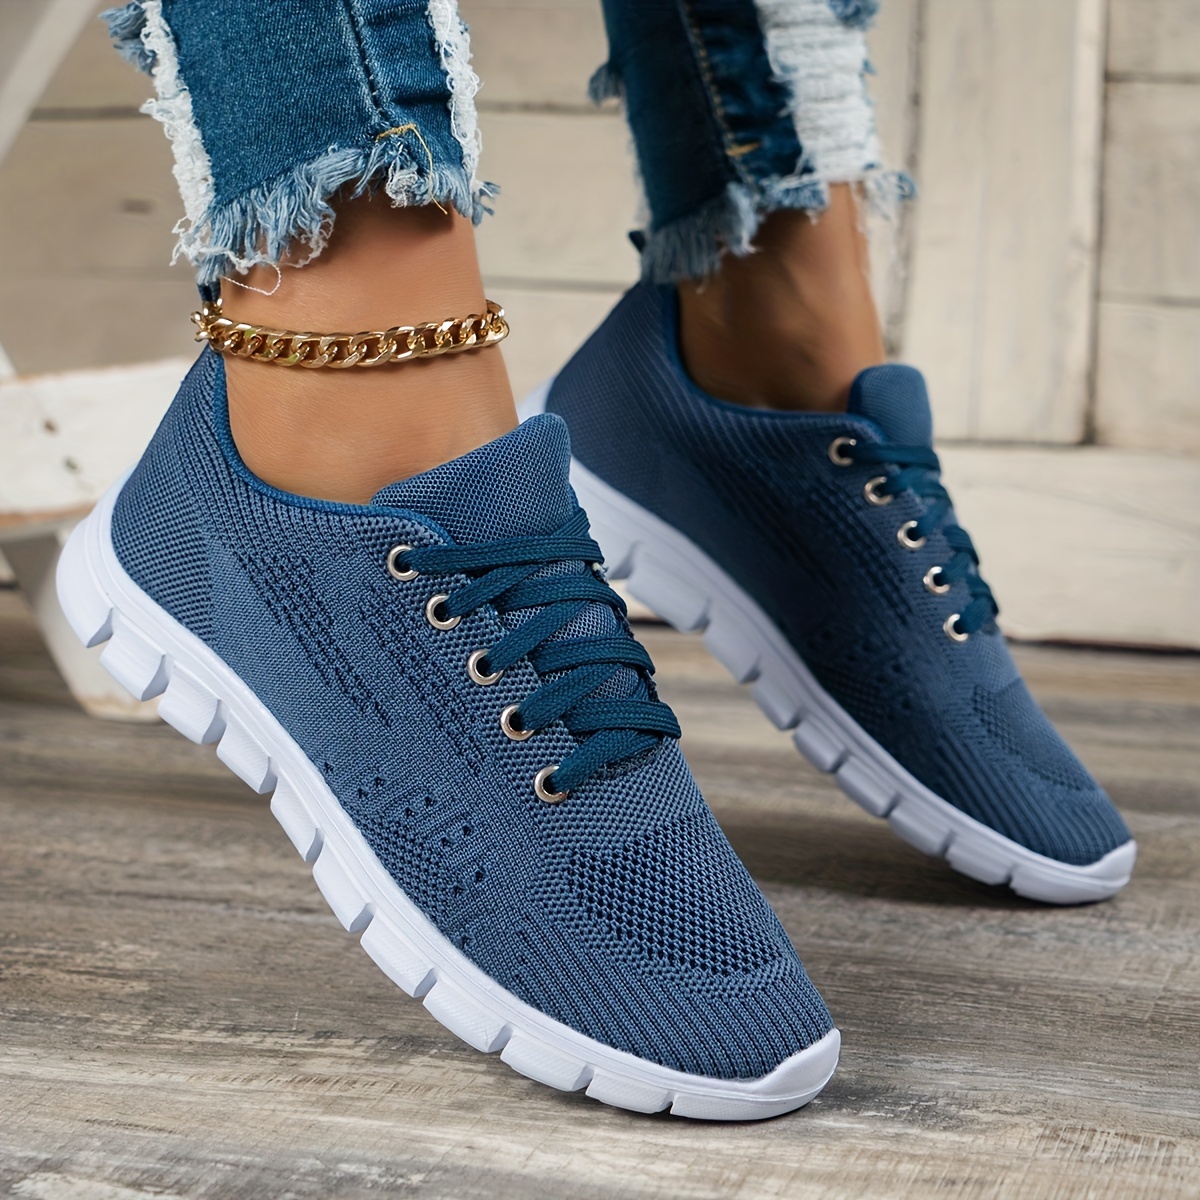 Women's Comfortable Breathable Knitted Casual Sports Shoes